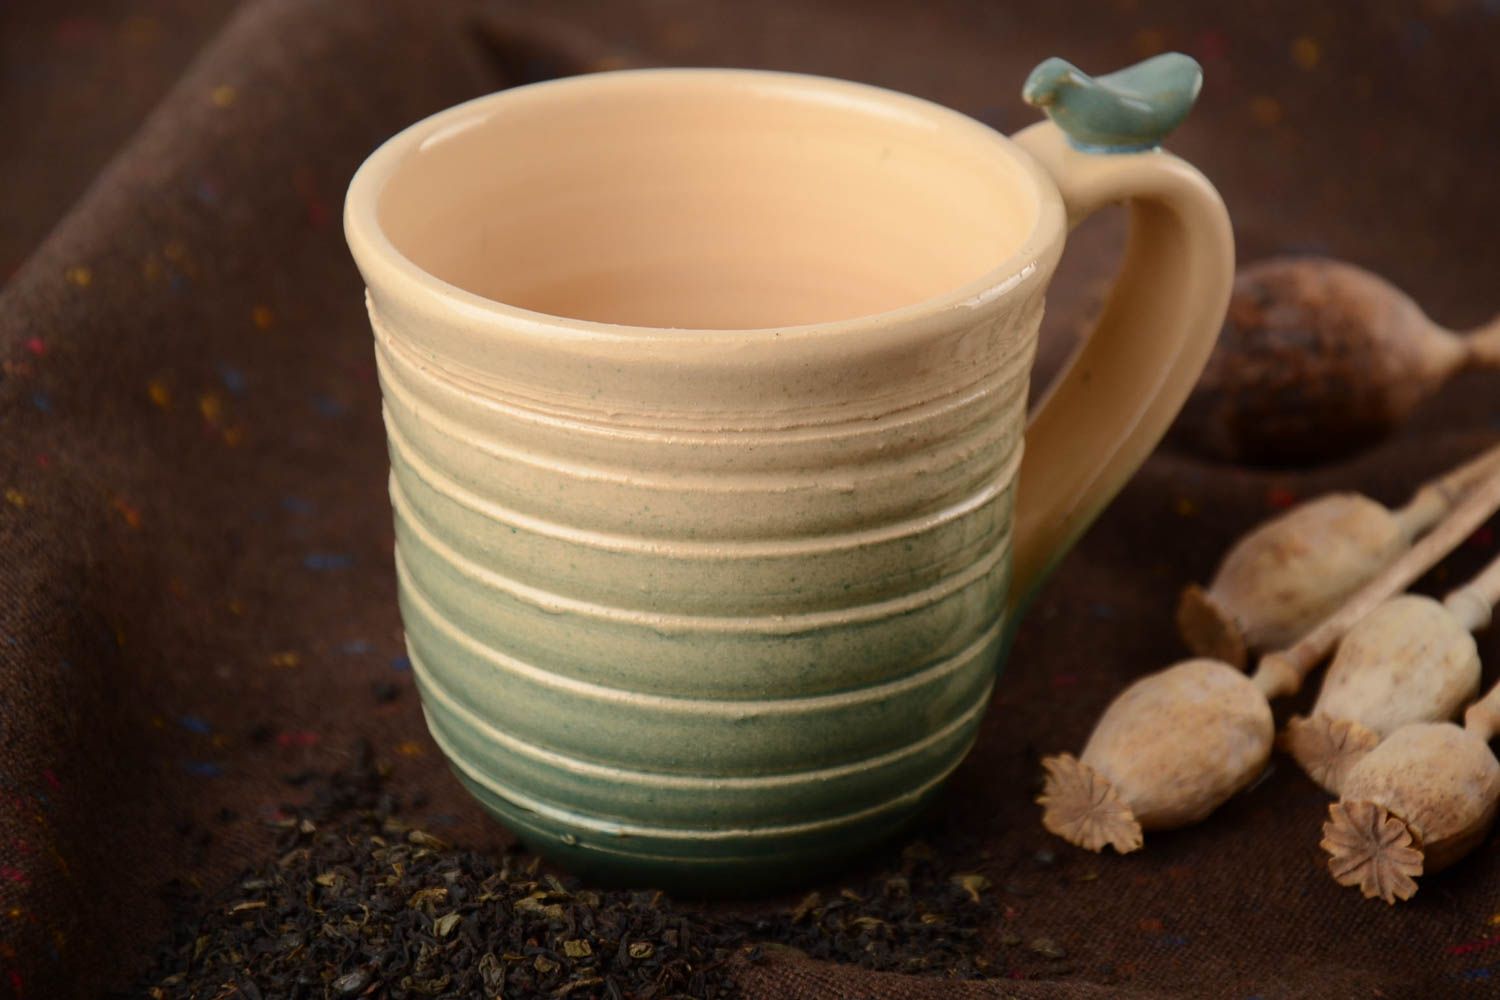 10 oz porcelain ceramic drinking cup in yellow and light blue color with handle. Great gift for a girl.  photo 1